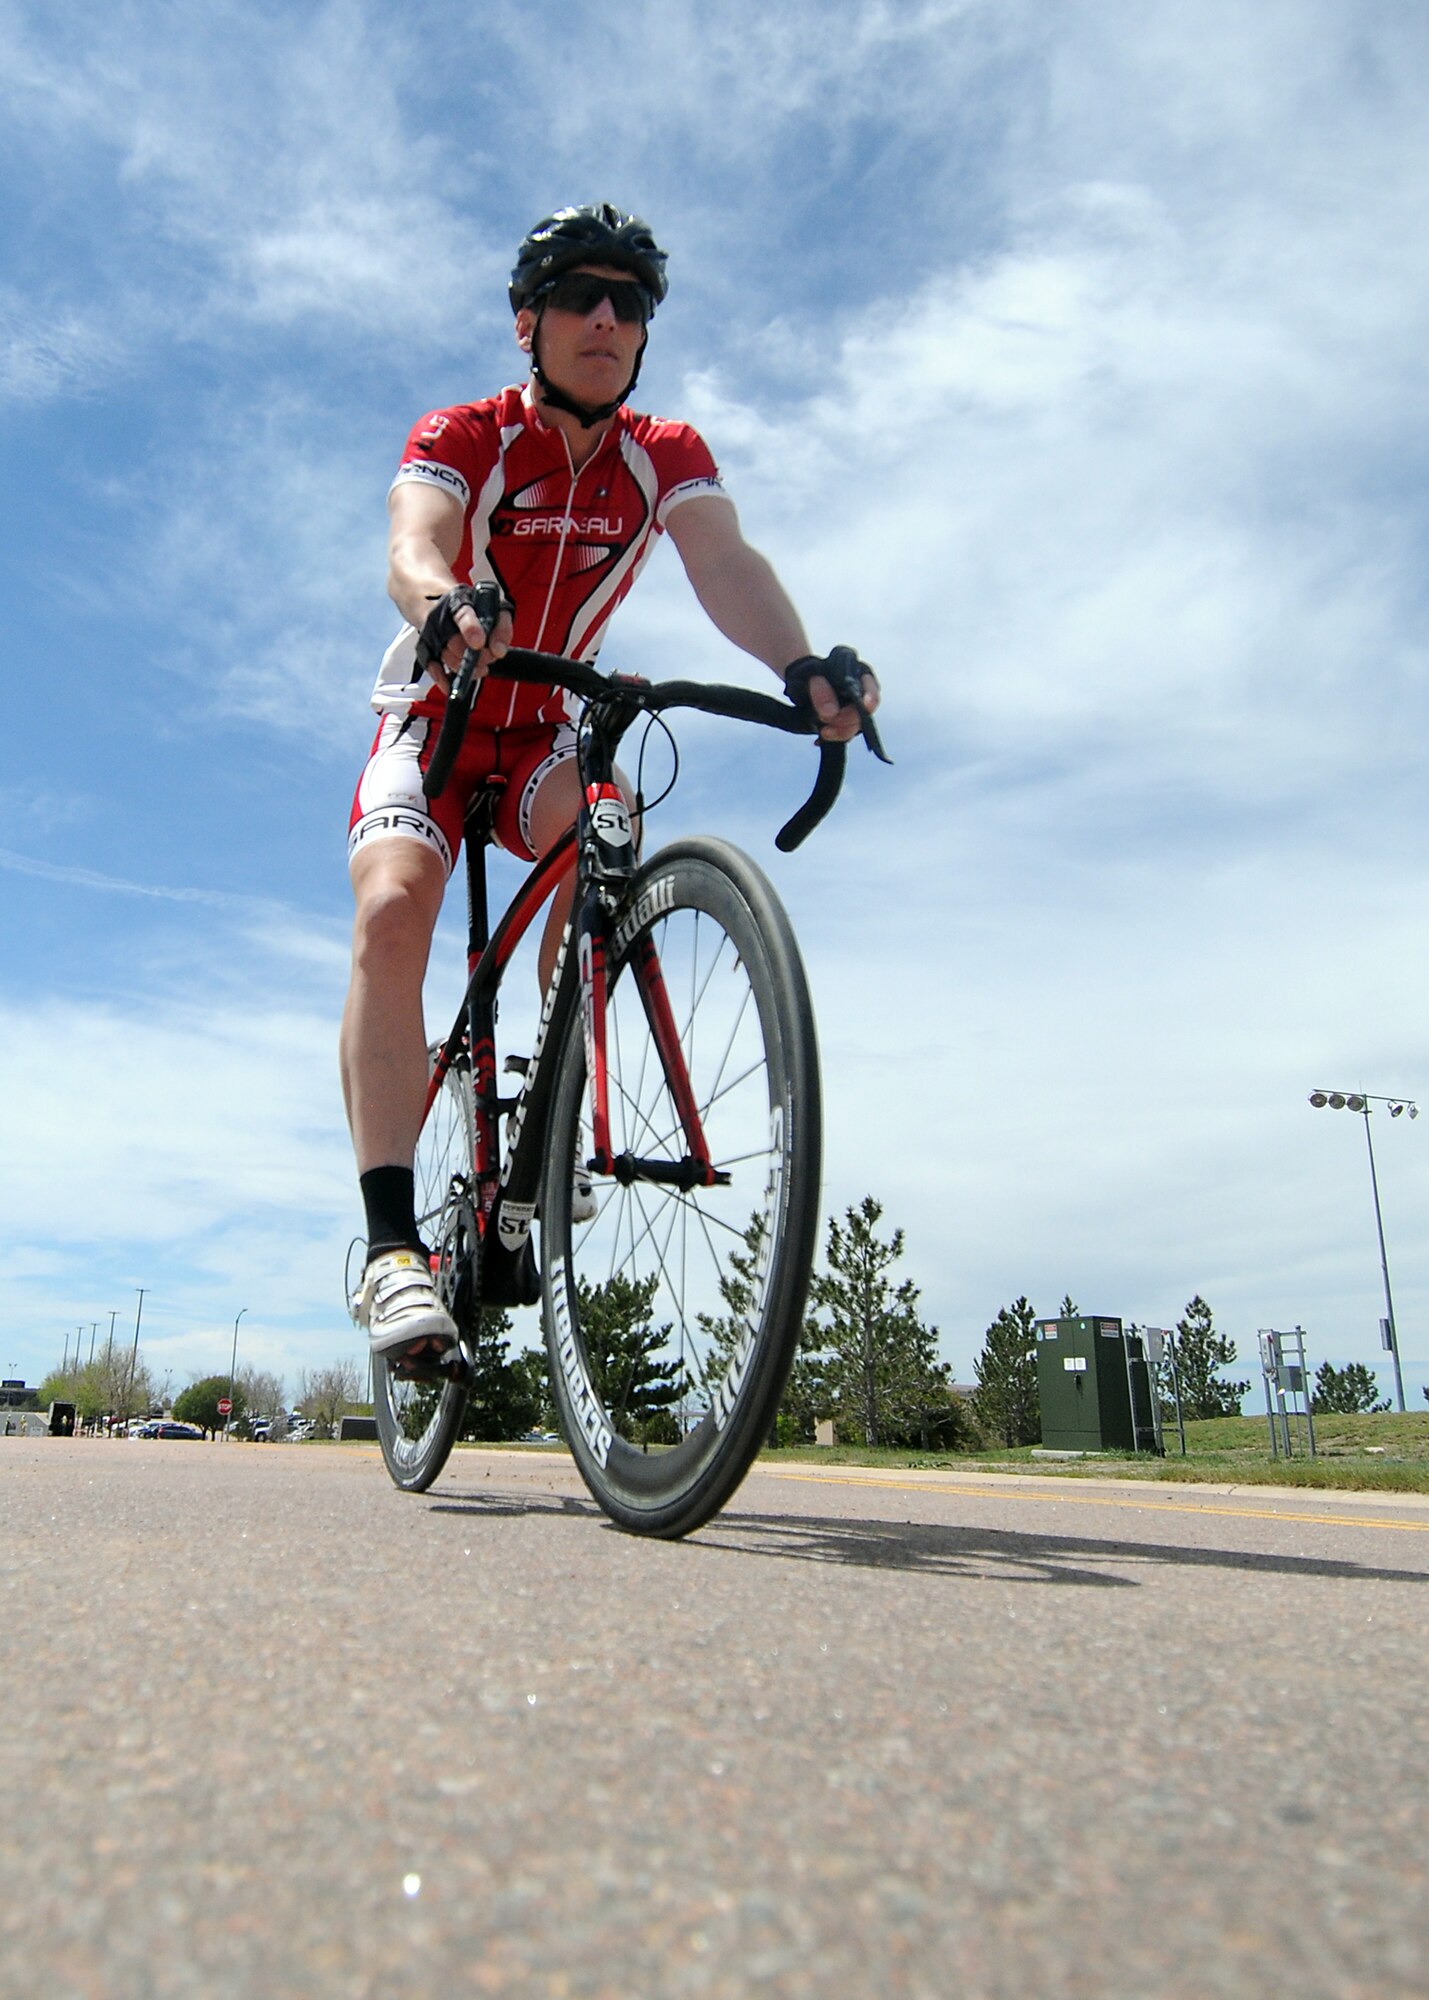 Derek Hamby, the 50th Space Wing Manpower and Organization chief, goes for a lunchtime bicycle ride at Schriever Air Force Base, Colo., May 28, 2015. Six months after sustaining life-threatening injuries from a serious bicycling accident, Hamby is preparing for a 100-mile mountain bike race. (U.S. Air Force photo/Staff Sgt. Debbie Lockhart)